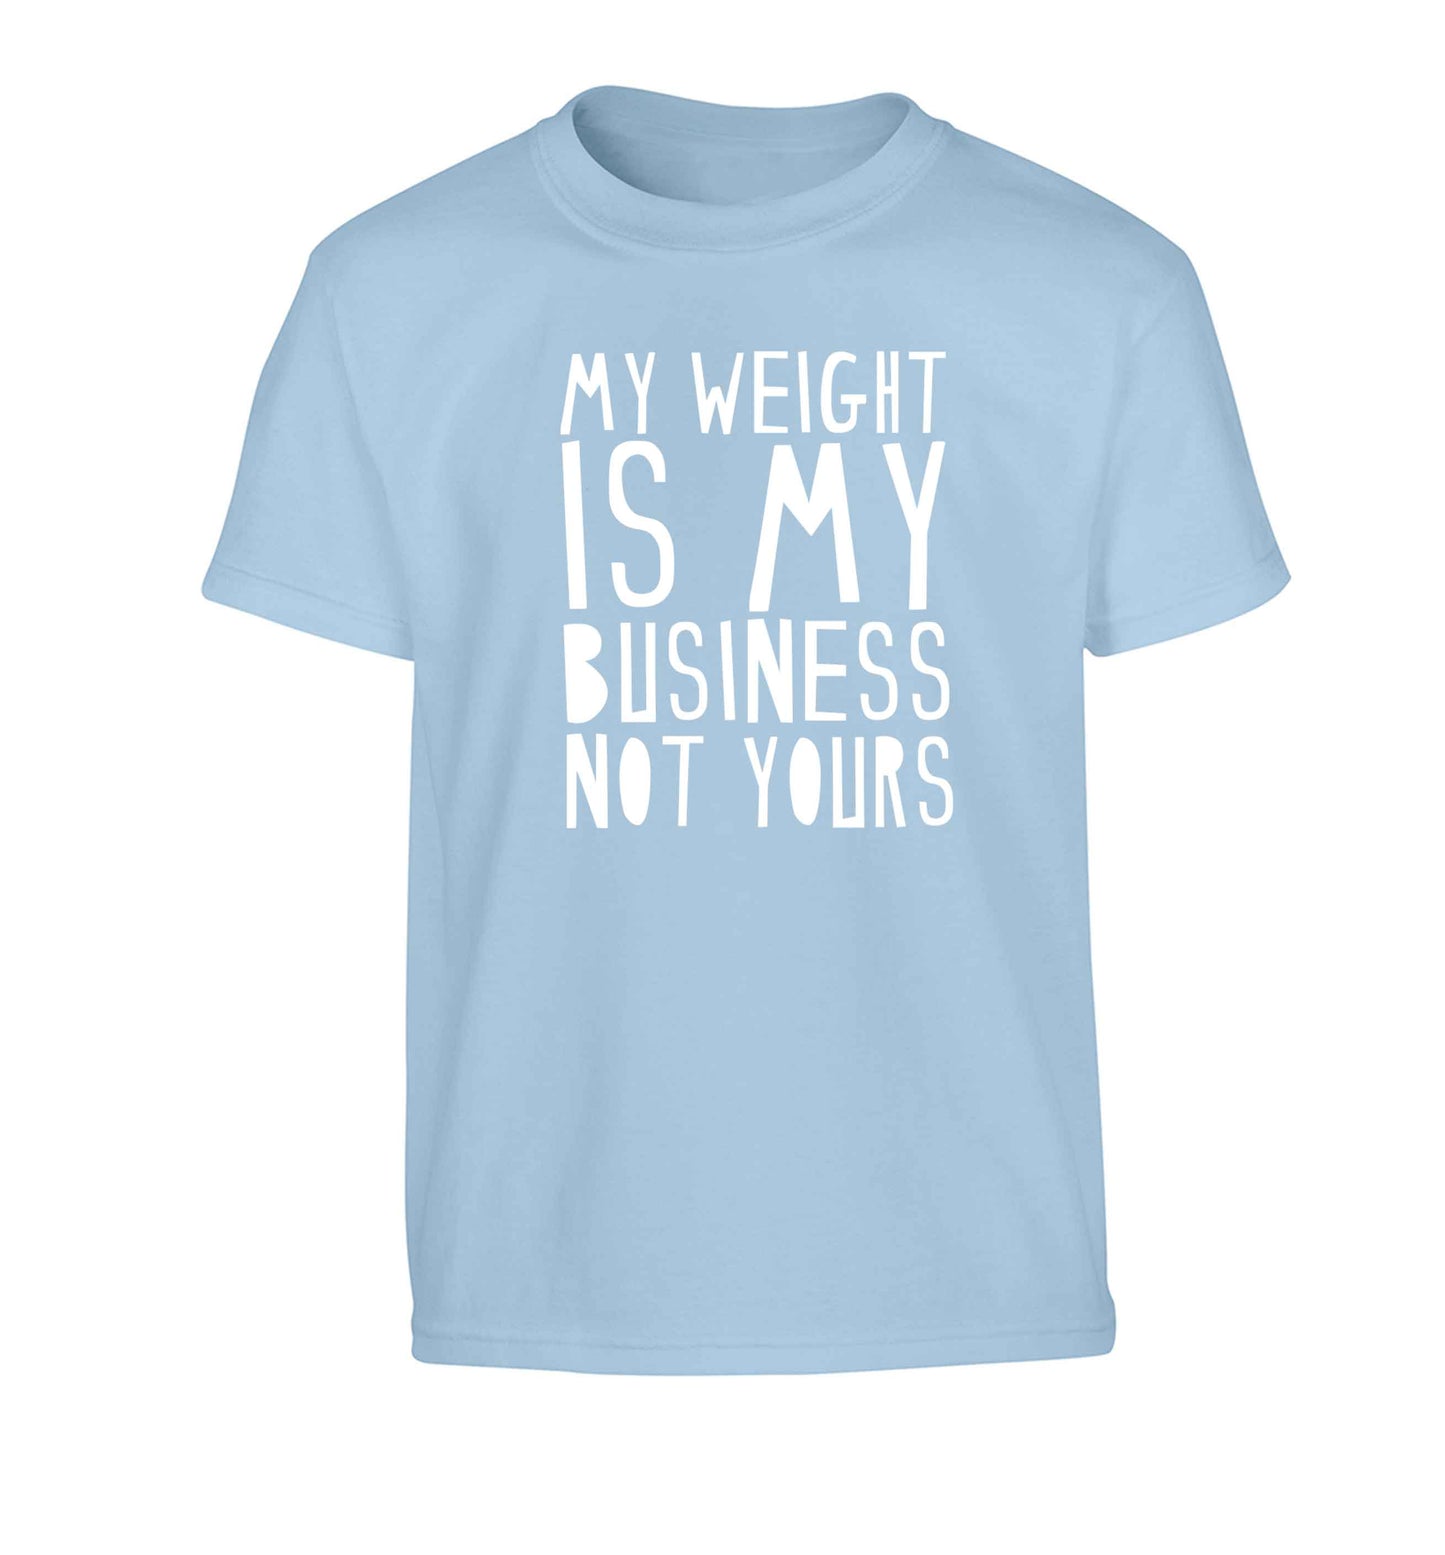 My weight is my business not yours Children's light blue Tshirt 12-13 Years